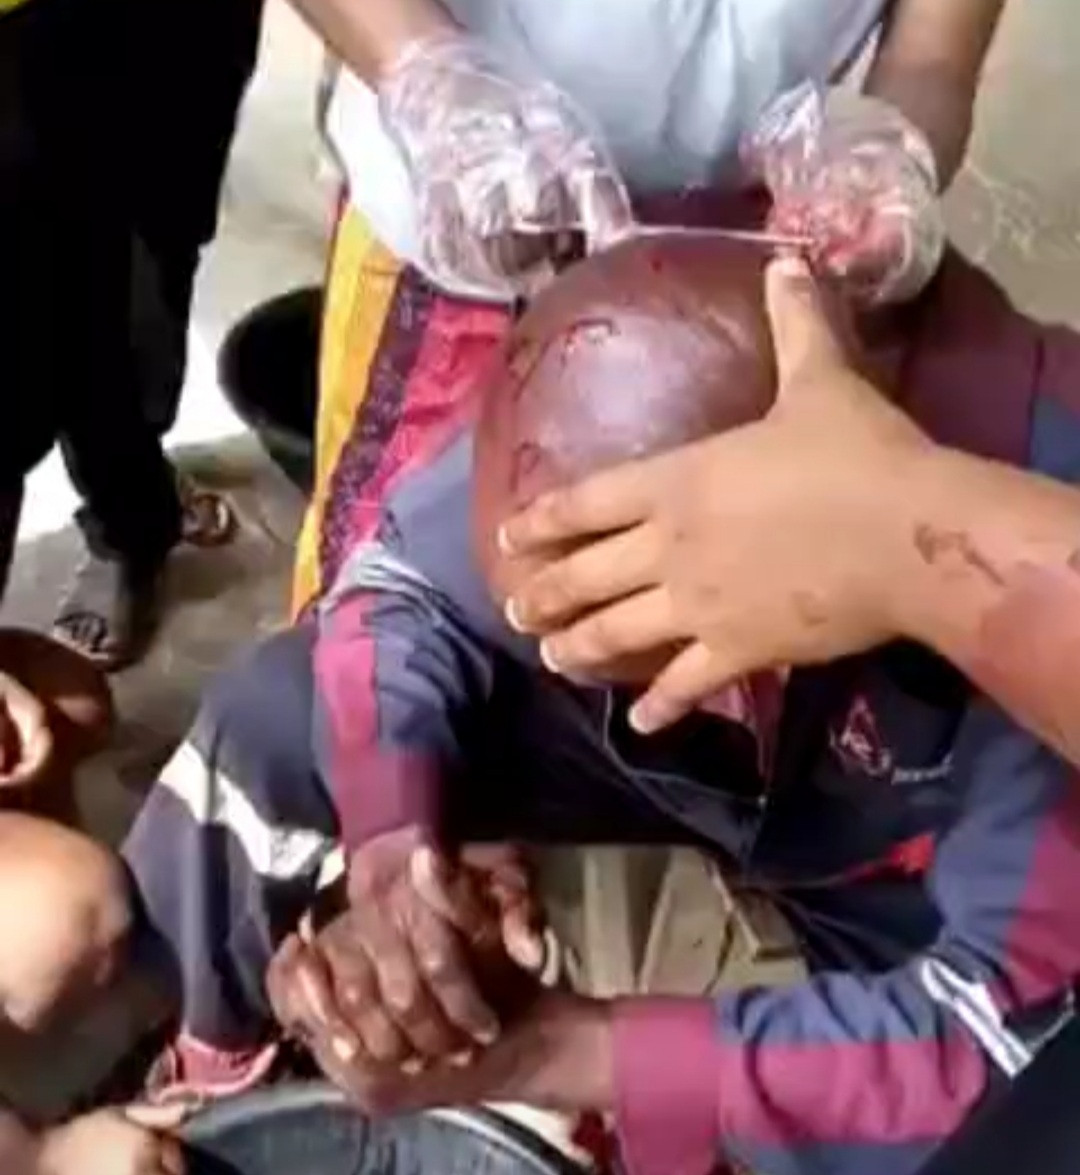 ikedc staff stabbed on the head with bottle when he tried to disconnect power from a community video